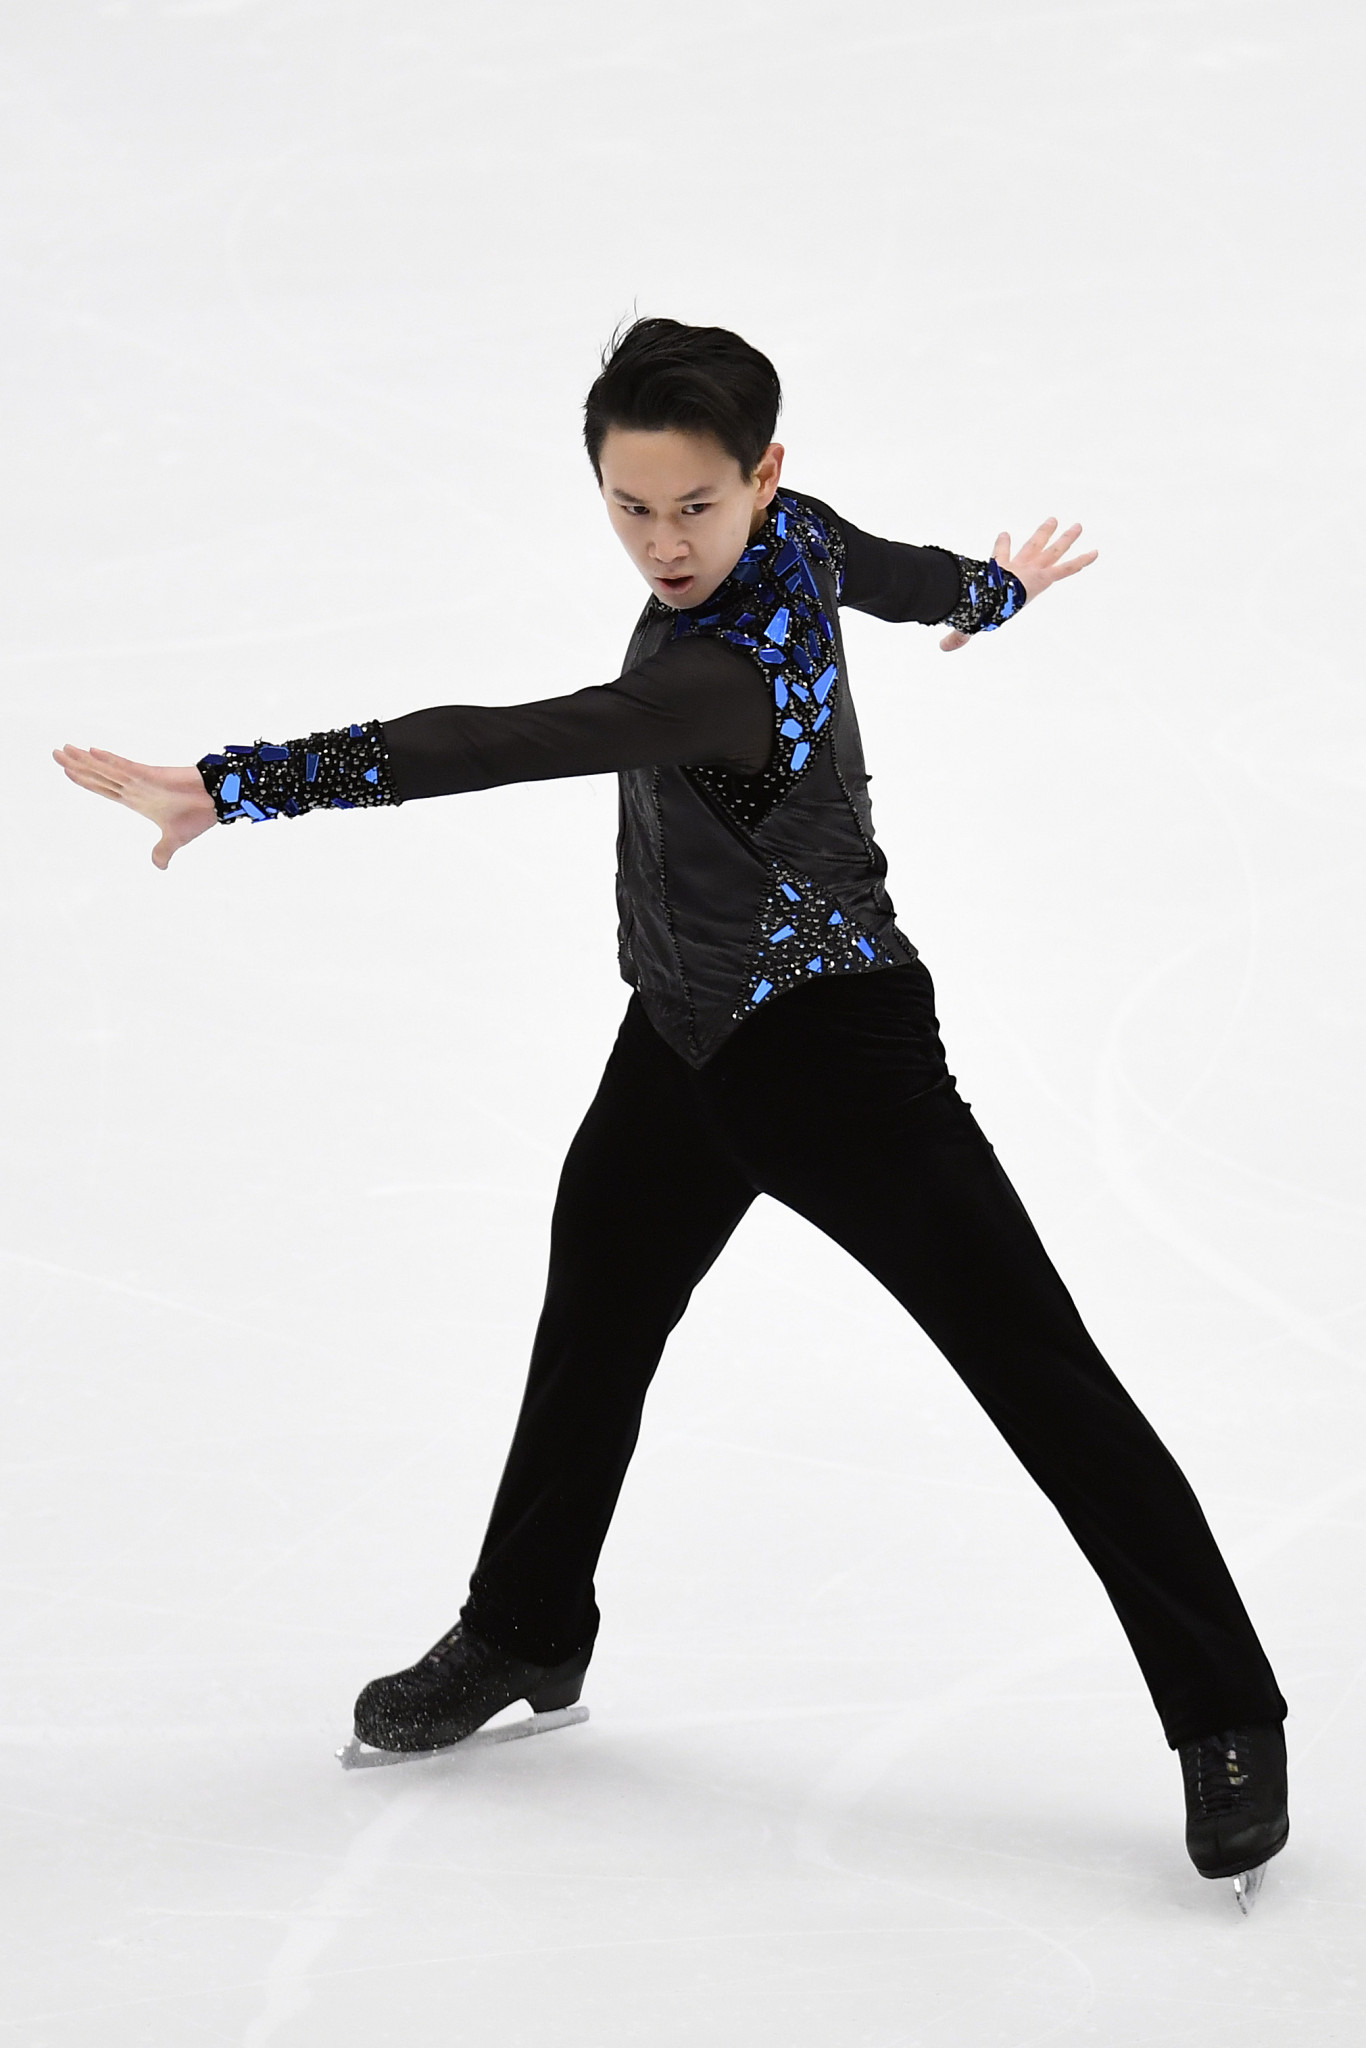 Denis Ten was one of Kazakhstan's most prominent athletes ©Getty Images